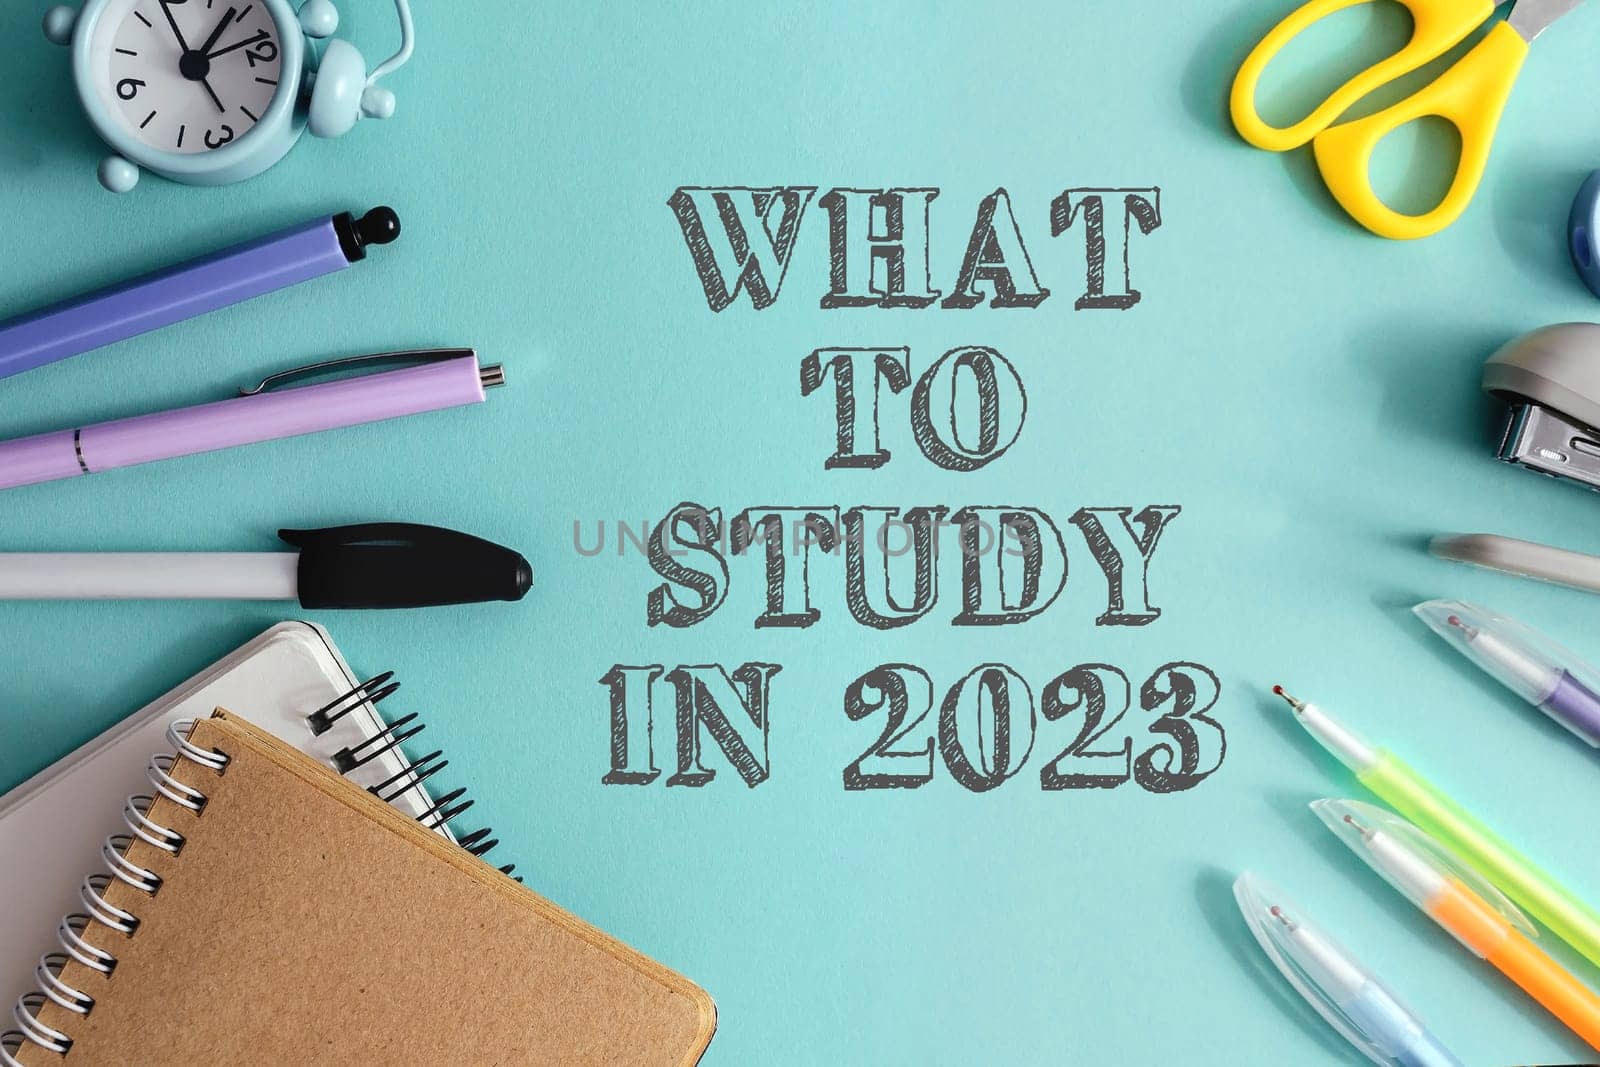 A blue background with a clock, scissors, pens, and pencils. The text What to Study in 2023 is written in white